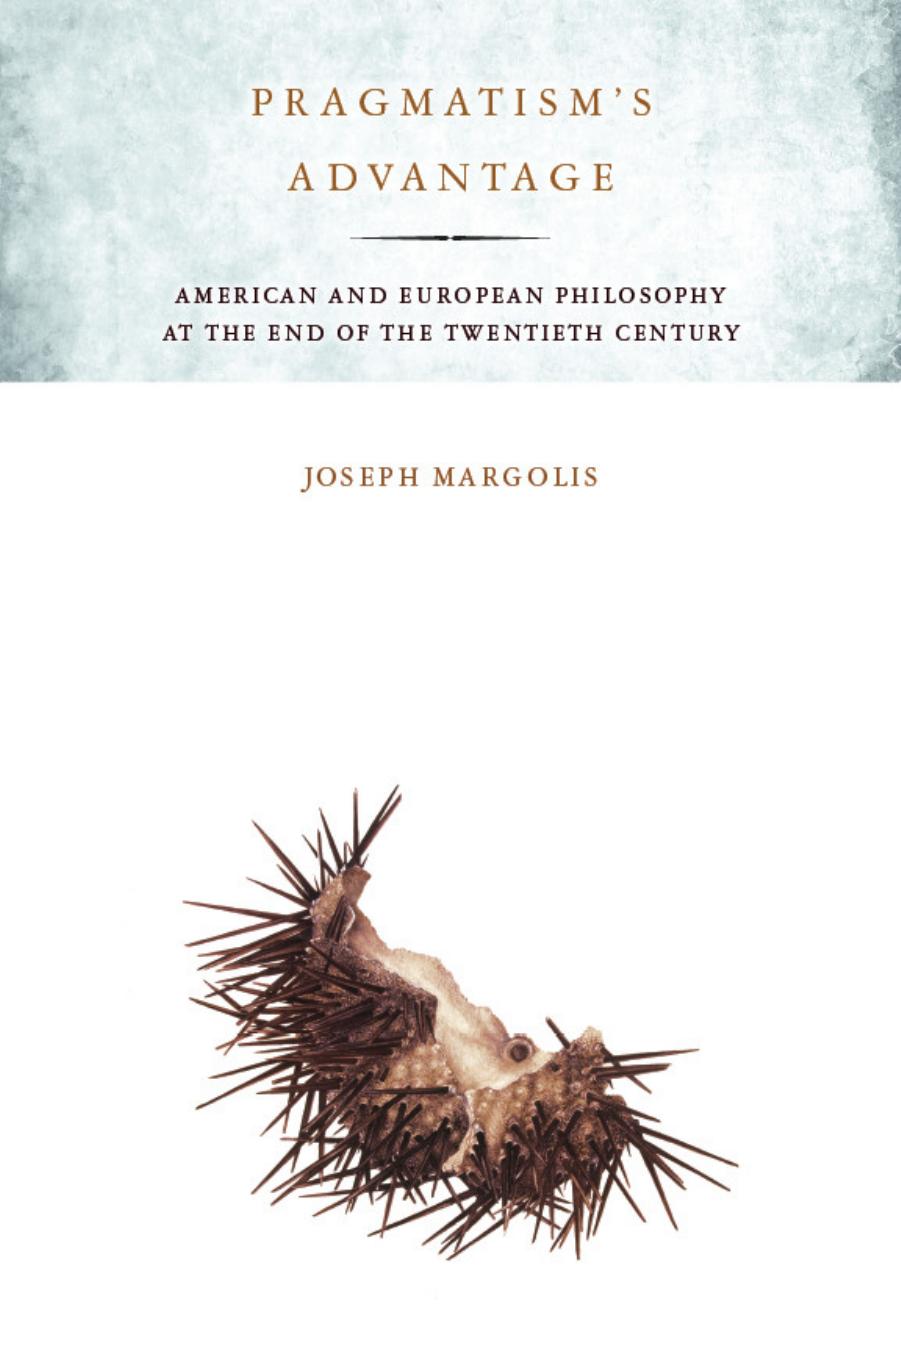 Pragmatism's Advantage: American and European Philosophy at the End of the Twentieth Century